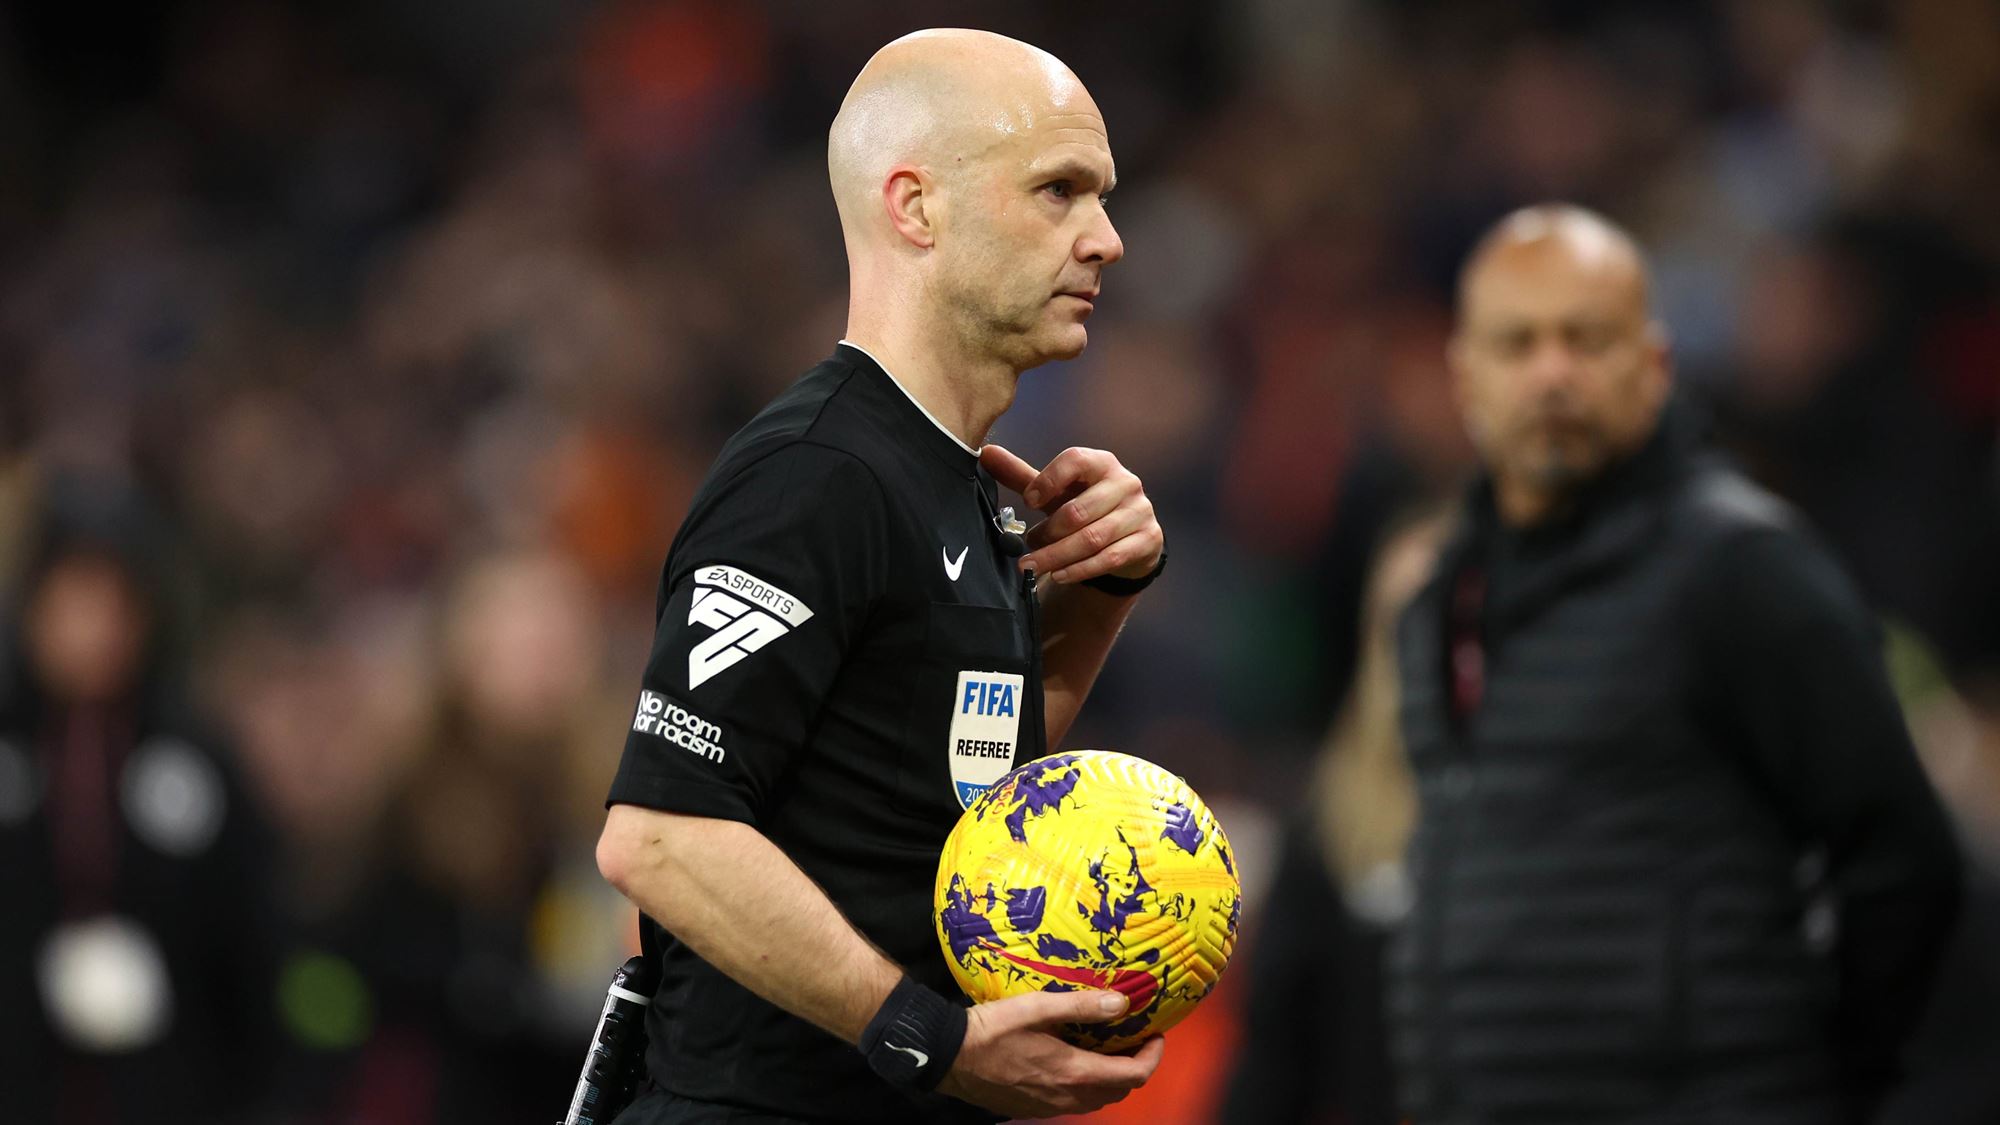 Newcastle United - Match officials announced for New Year's Day at Anfield